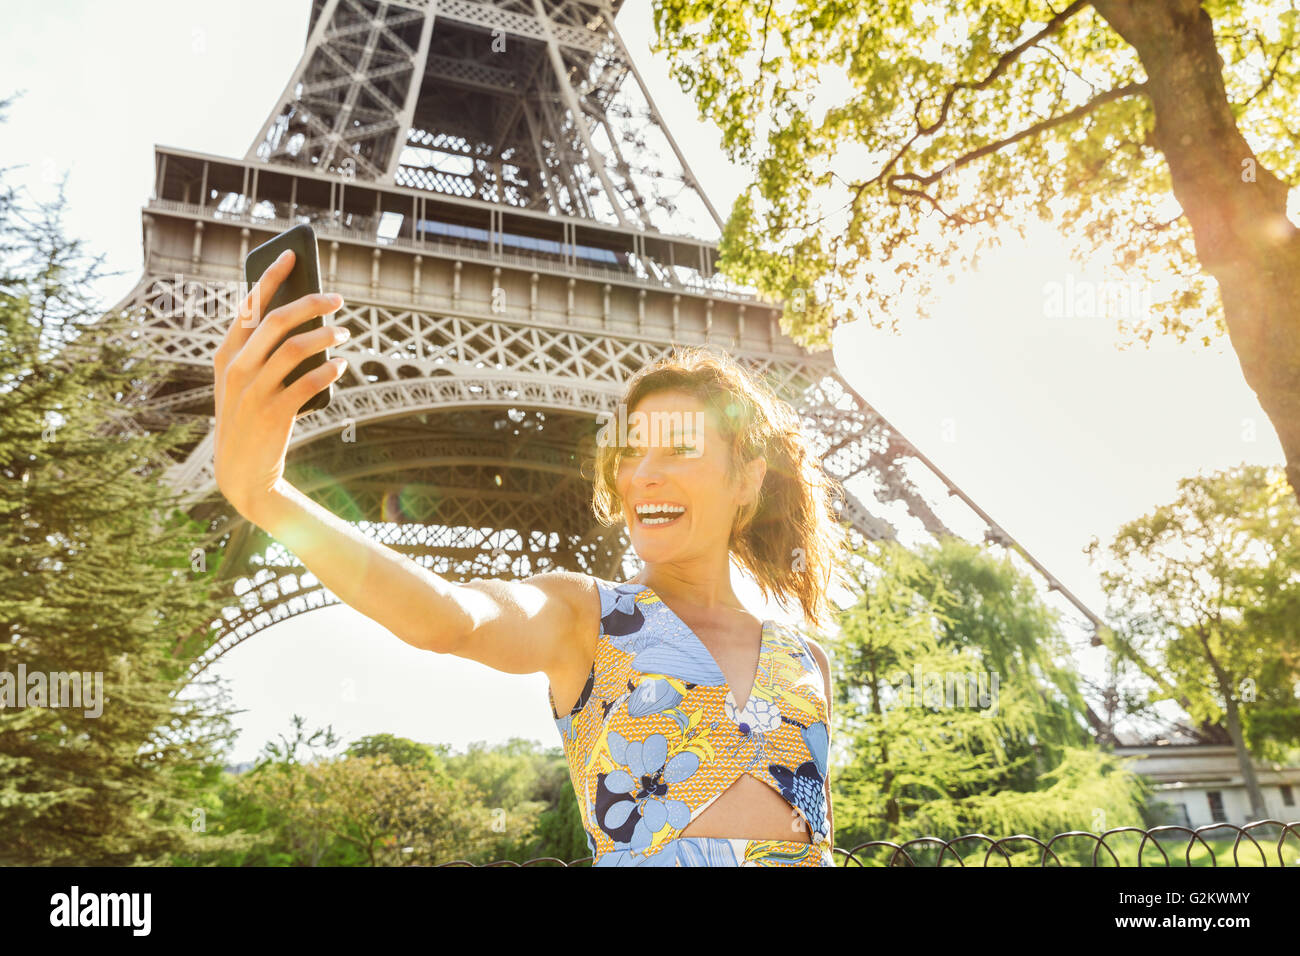 Paris, Woman doing a selfie with Eiffel Tower on background Stock Photo